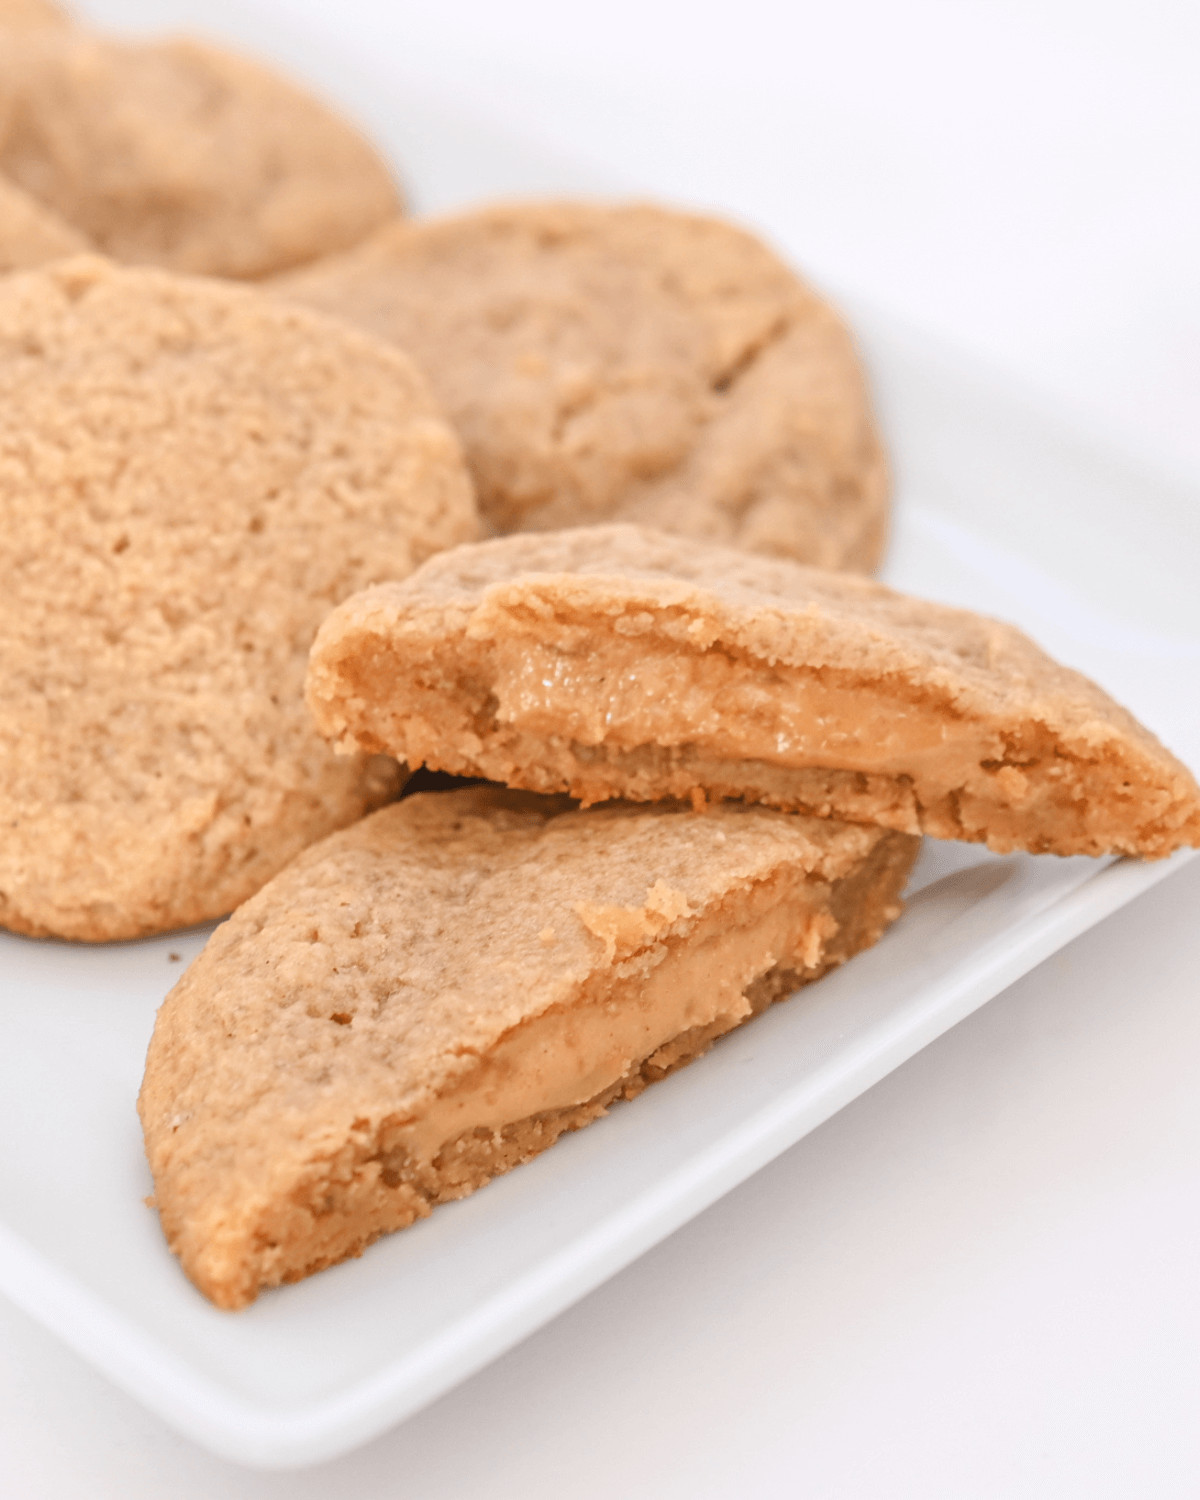 Peanut butter stuffed cookies on a white plate.